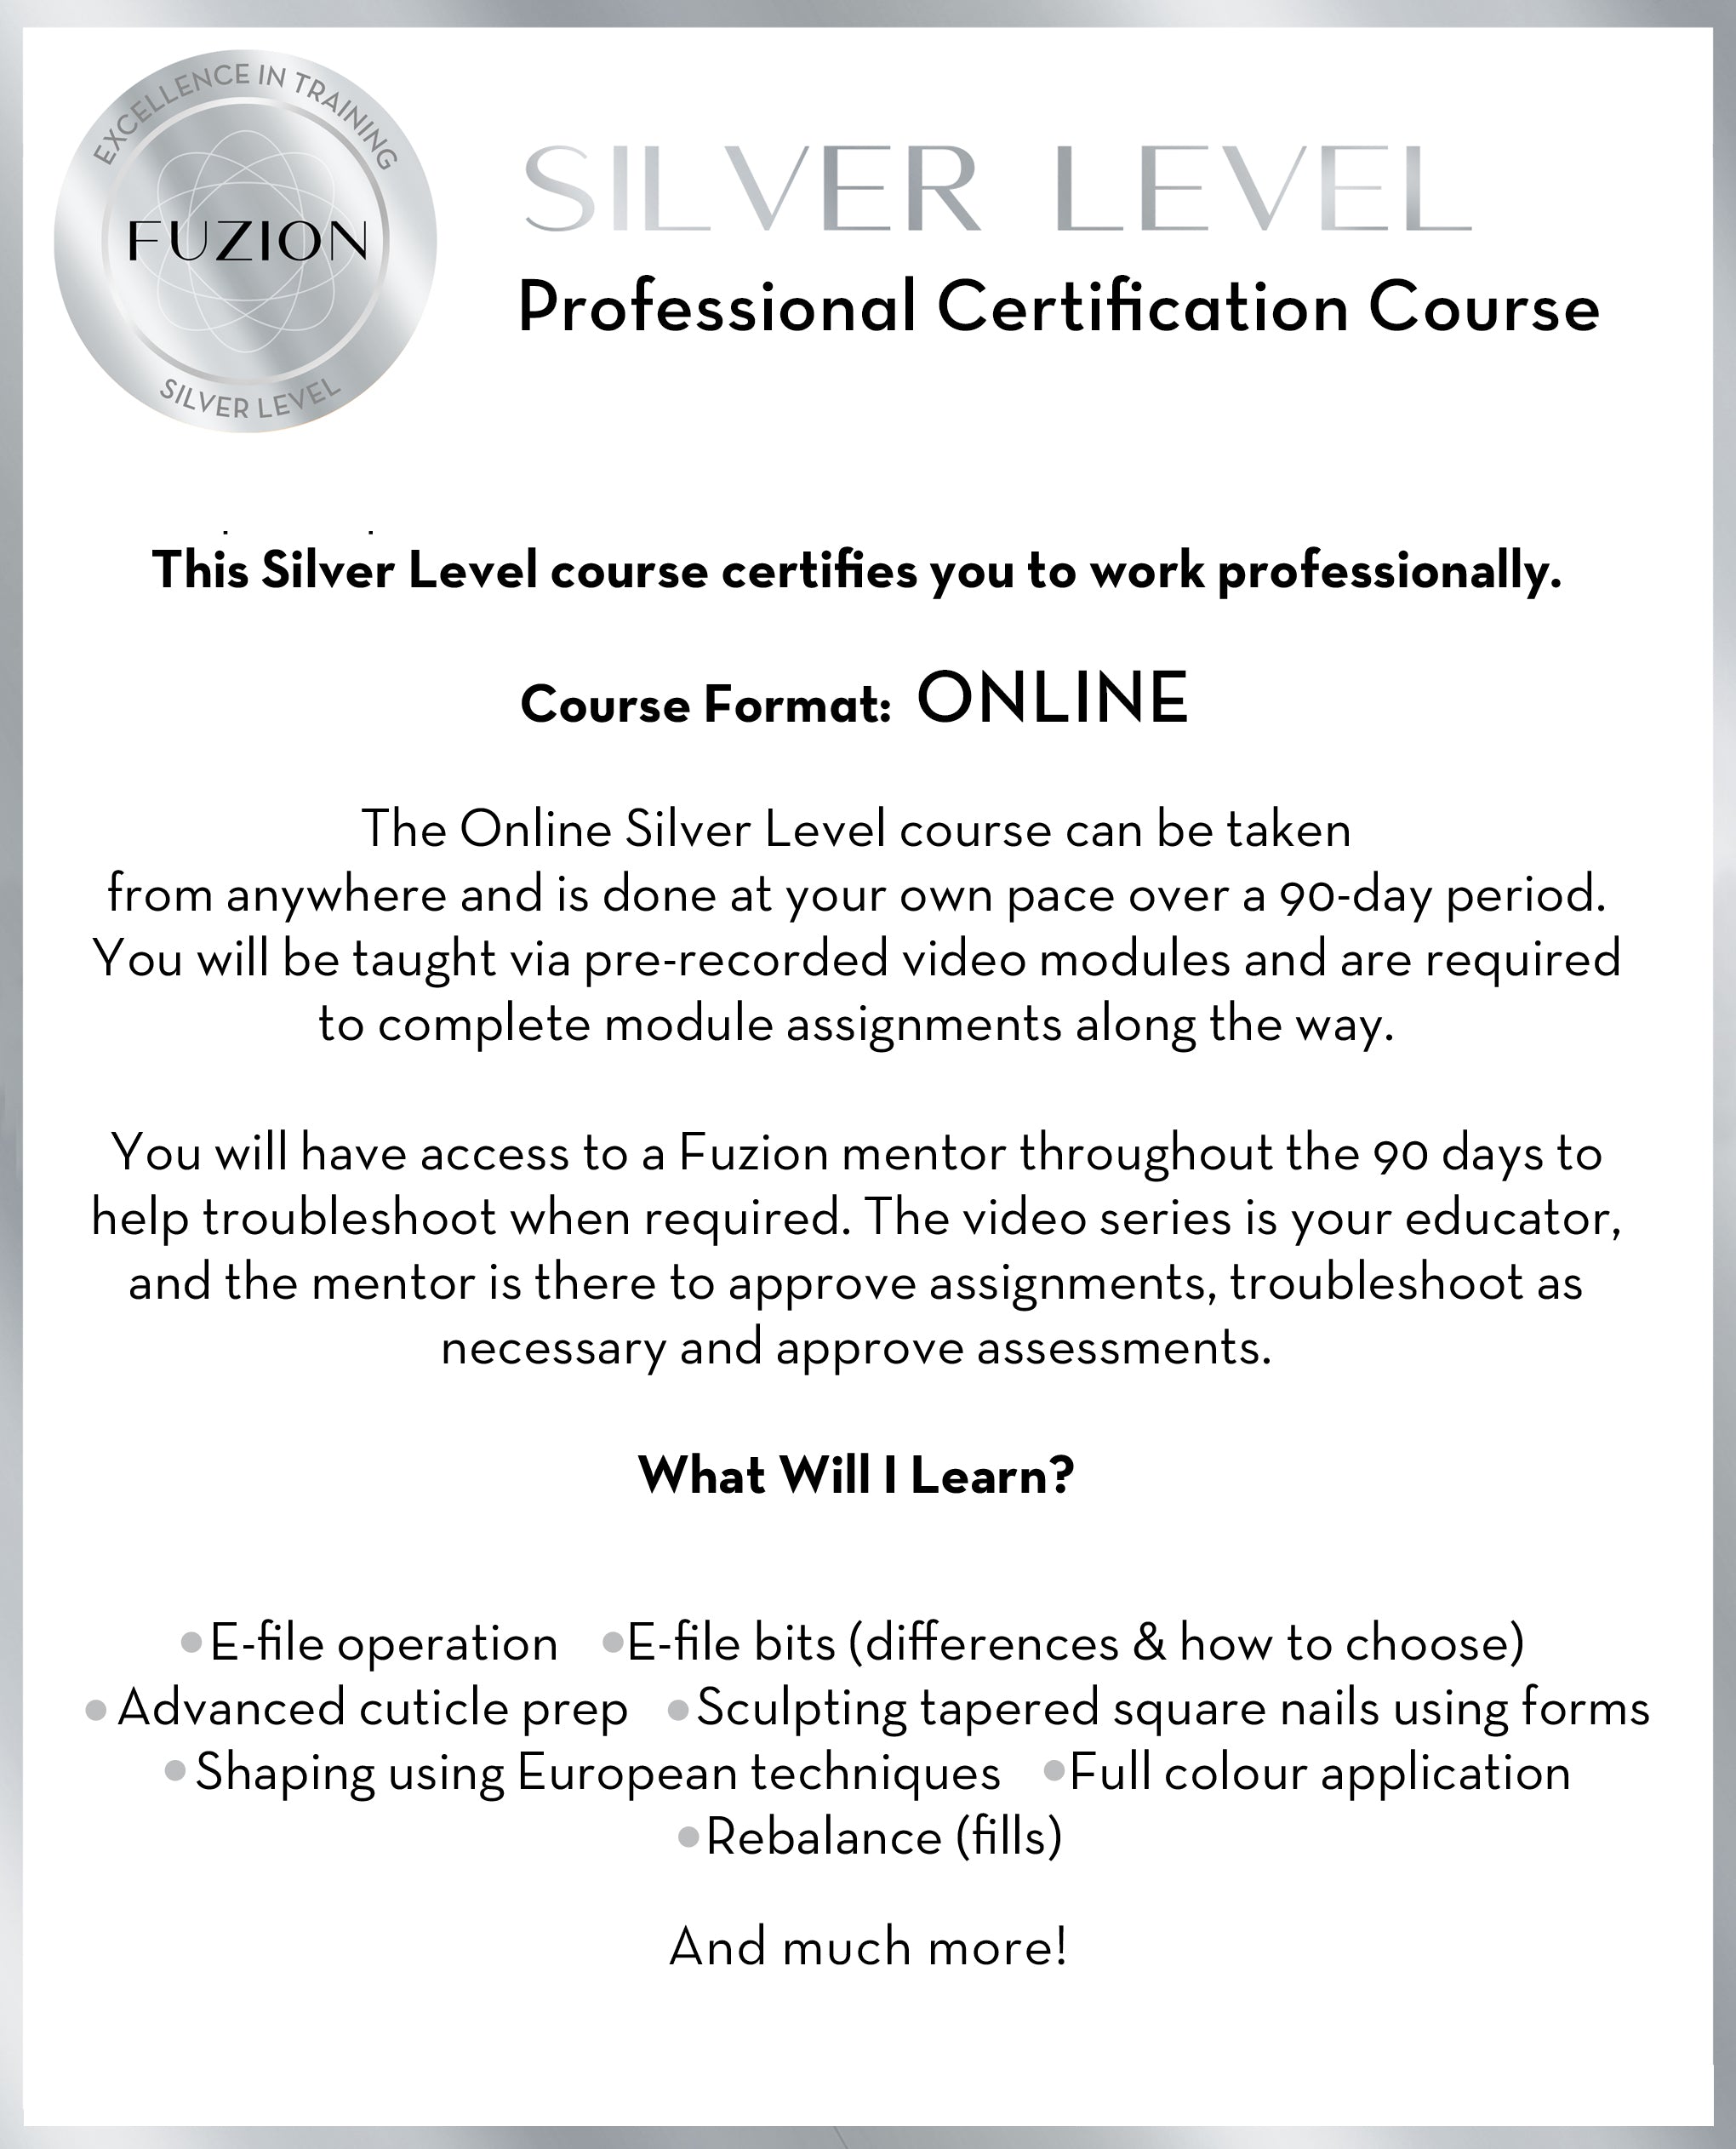 ONLINE Professional Certification Nail Tech Training - Silver Level - Product Kit Included